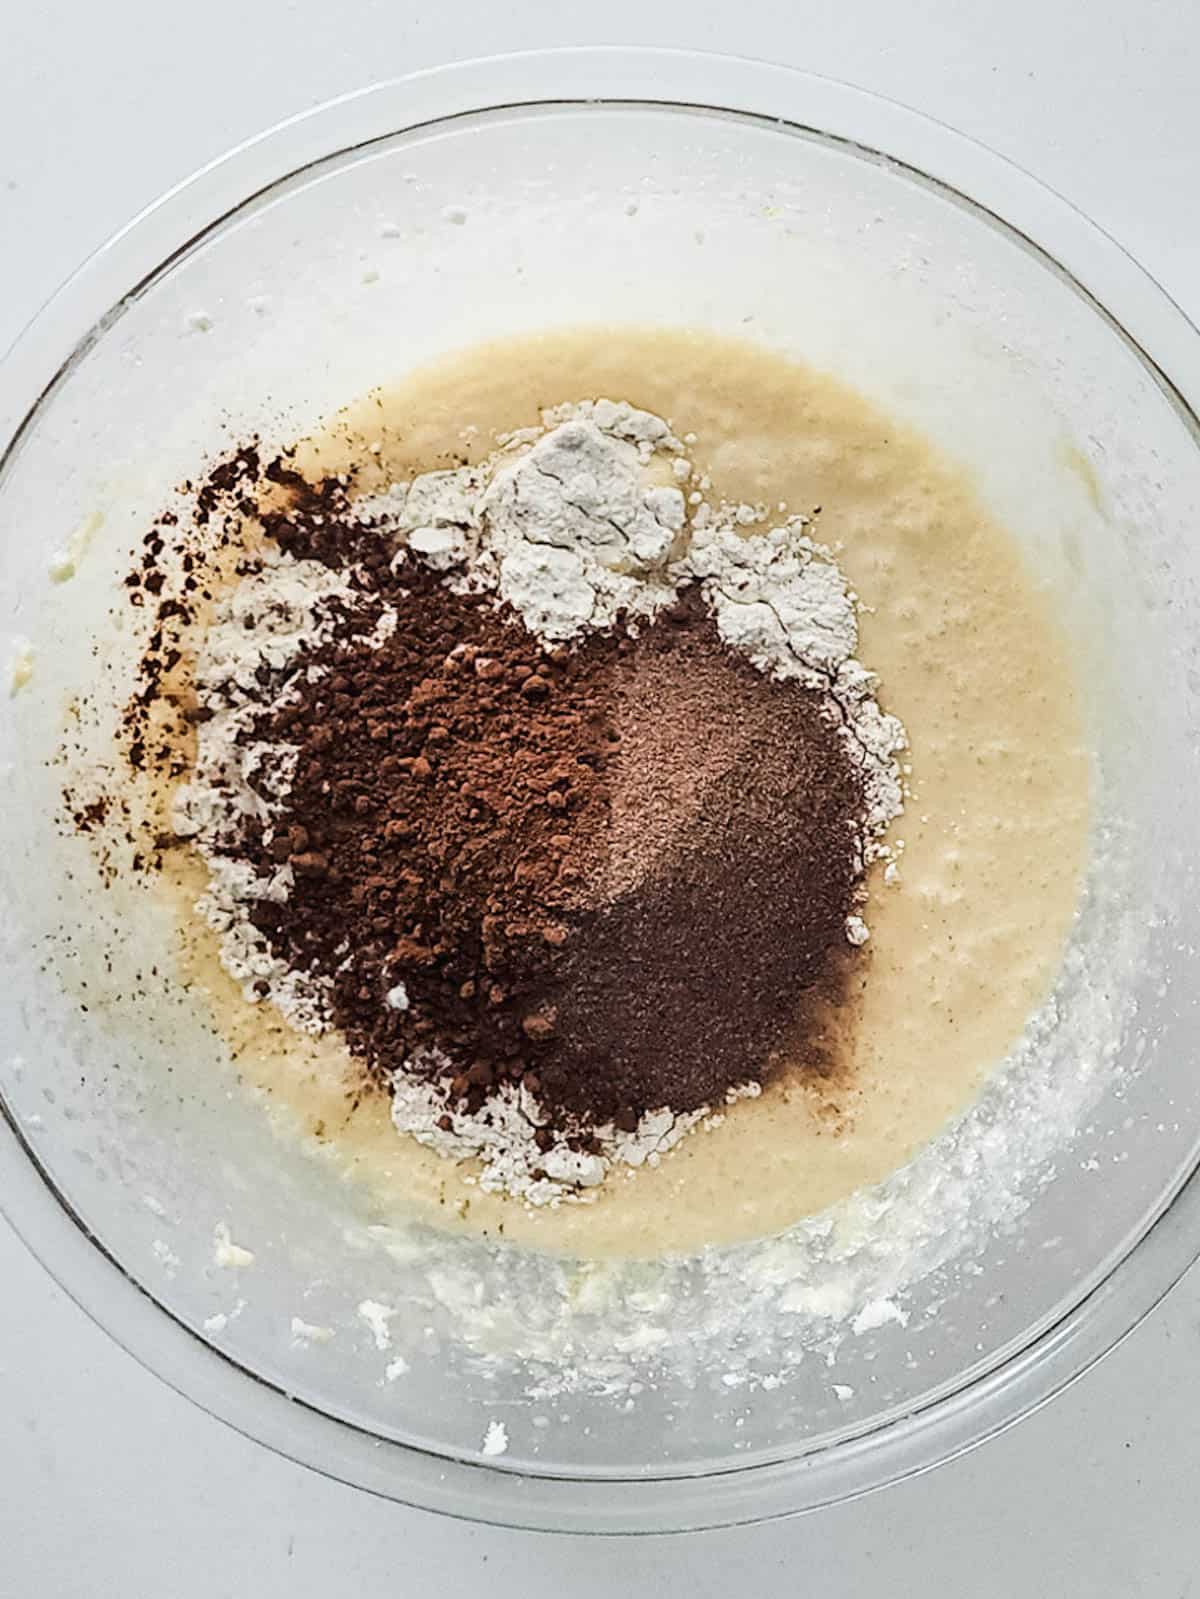 A bowl with cupcake batter with dry cocoa powder and hot chocolate mix before being mixed.